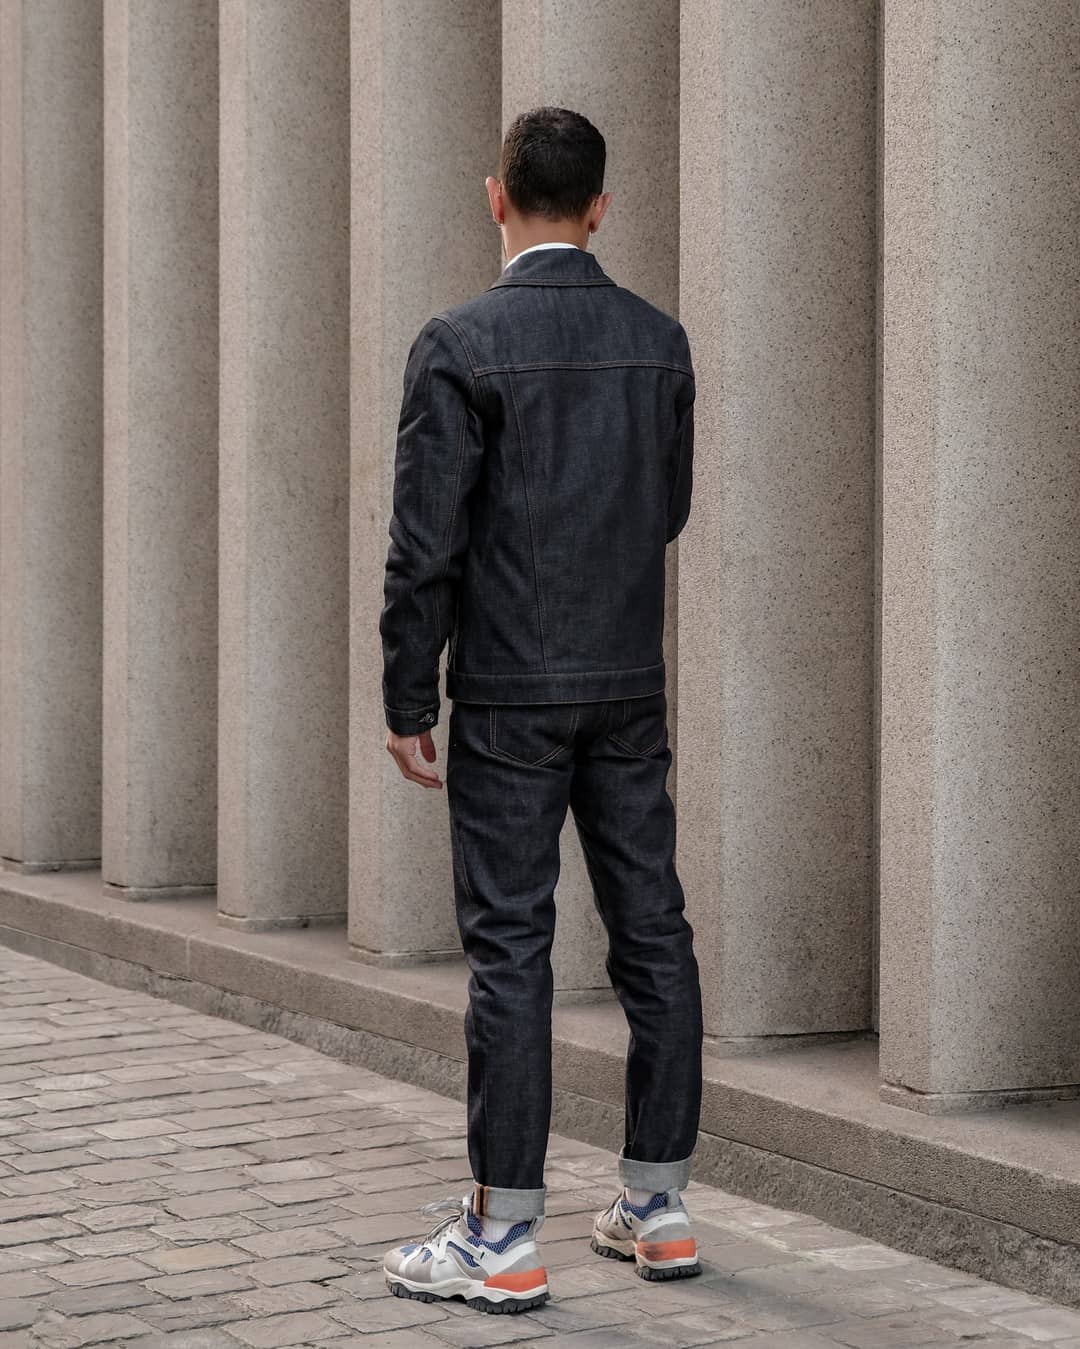 back view of a man in denim clothing